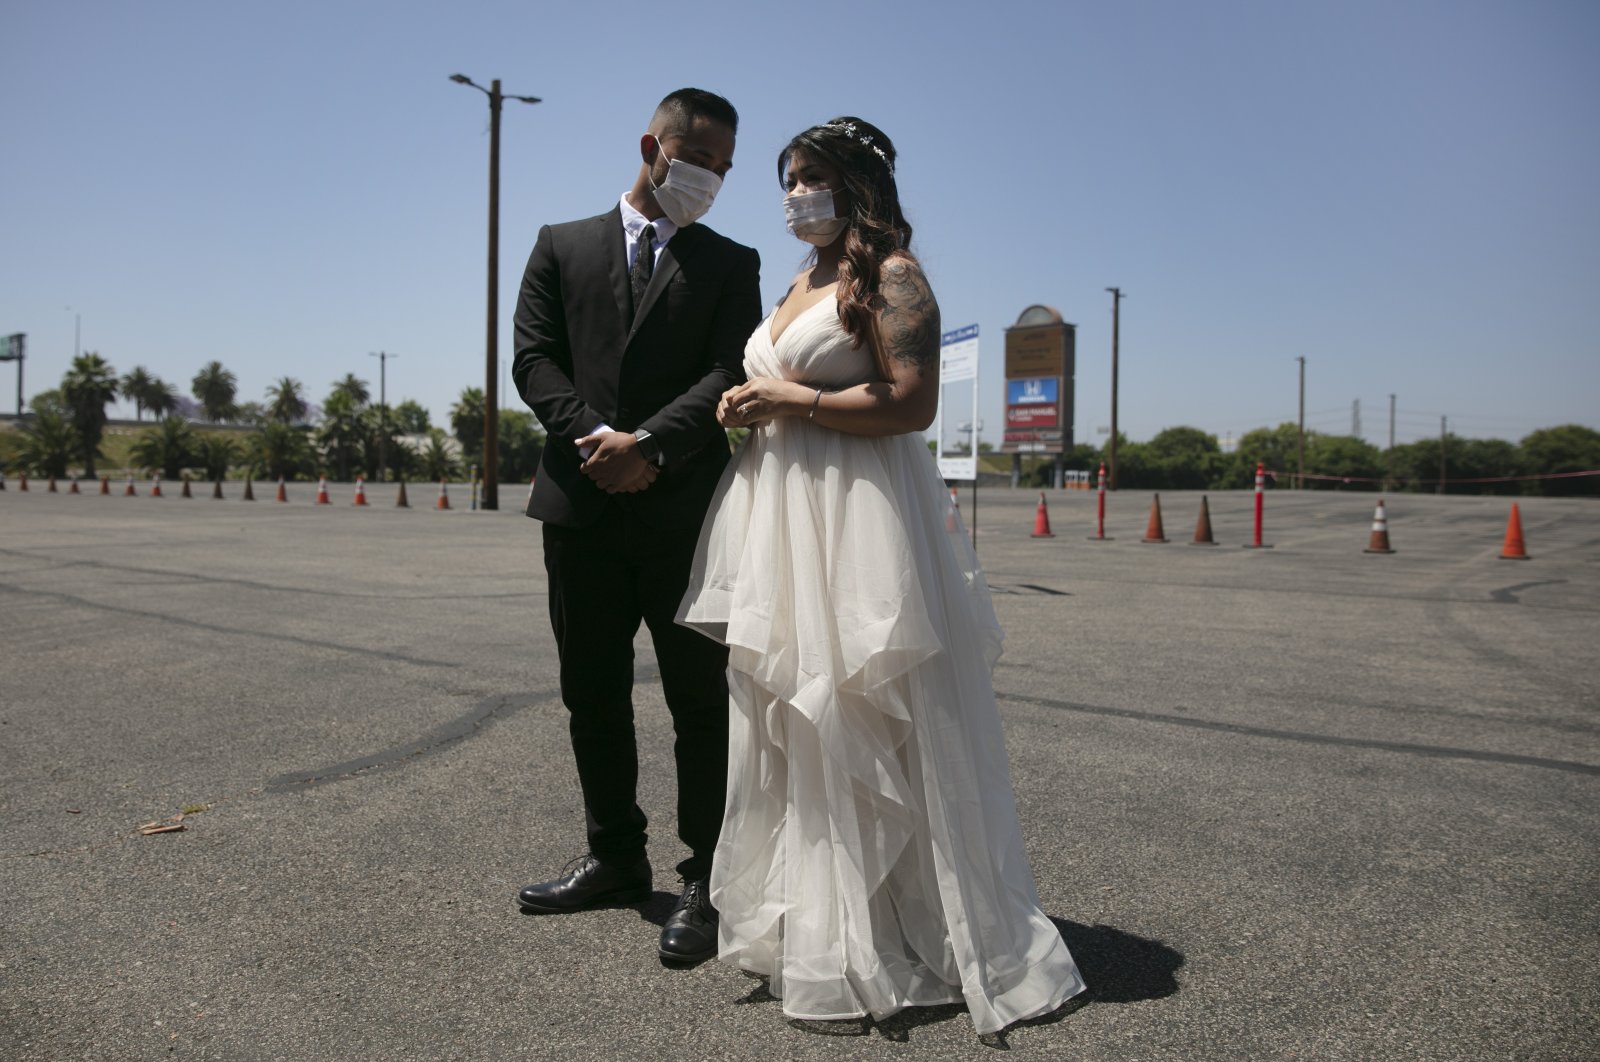 Roselle Querido, right, and her bridegroom Mo de las Alas wait for their marriage service to begin in the parking lot of the Honda Center in Anaheim, Calif., Tuesday, May 26, 2020. (AP Photo)